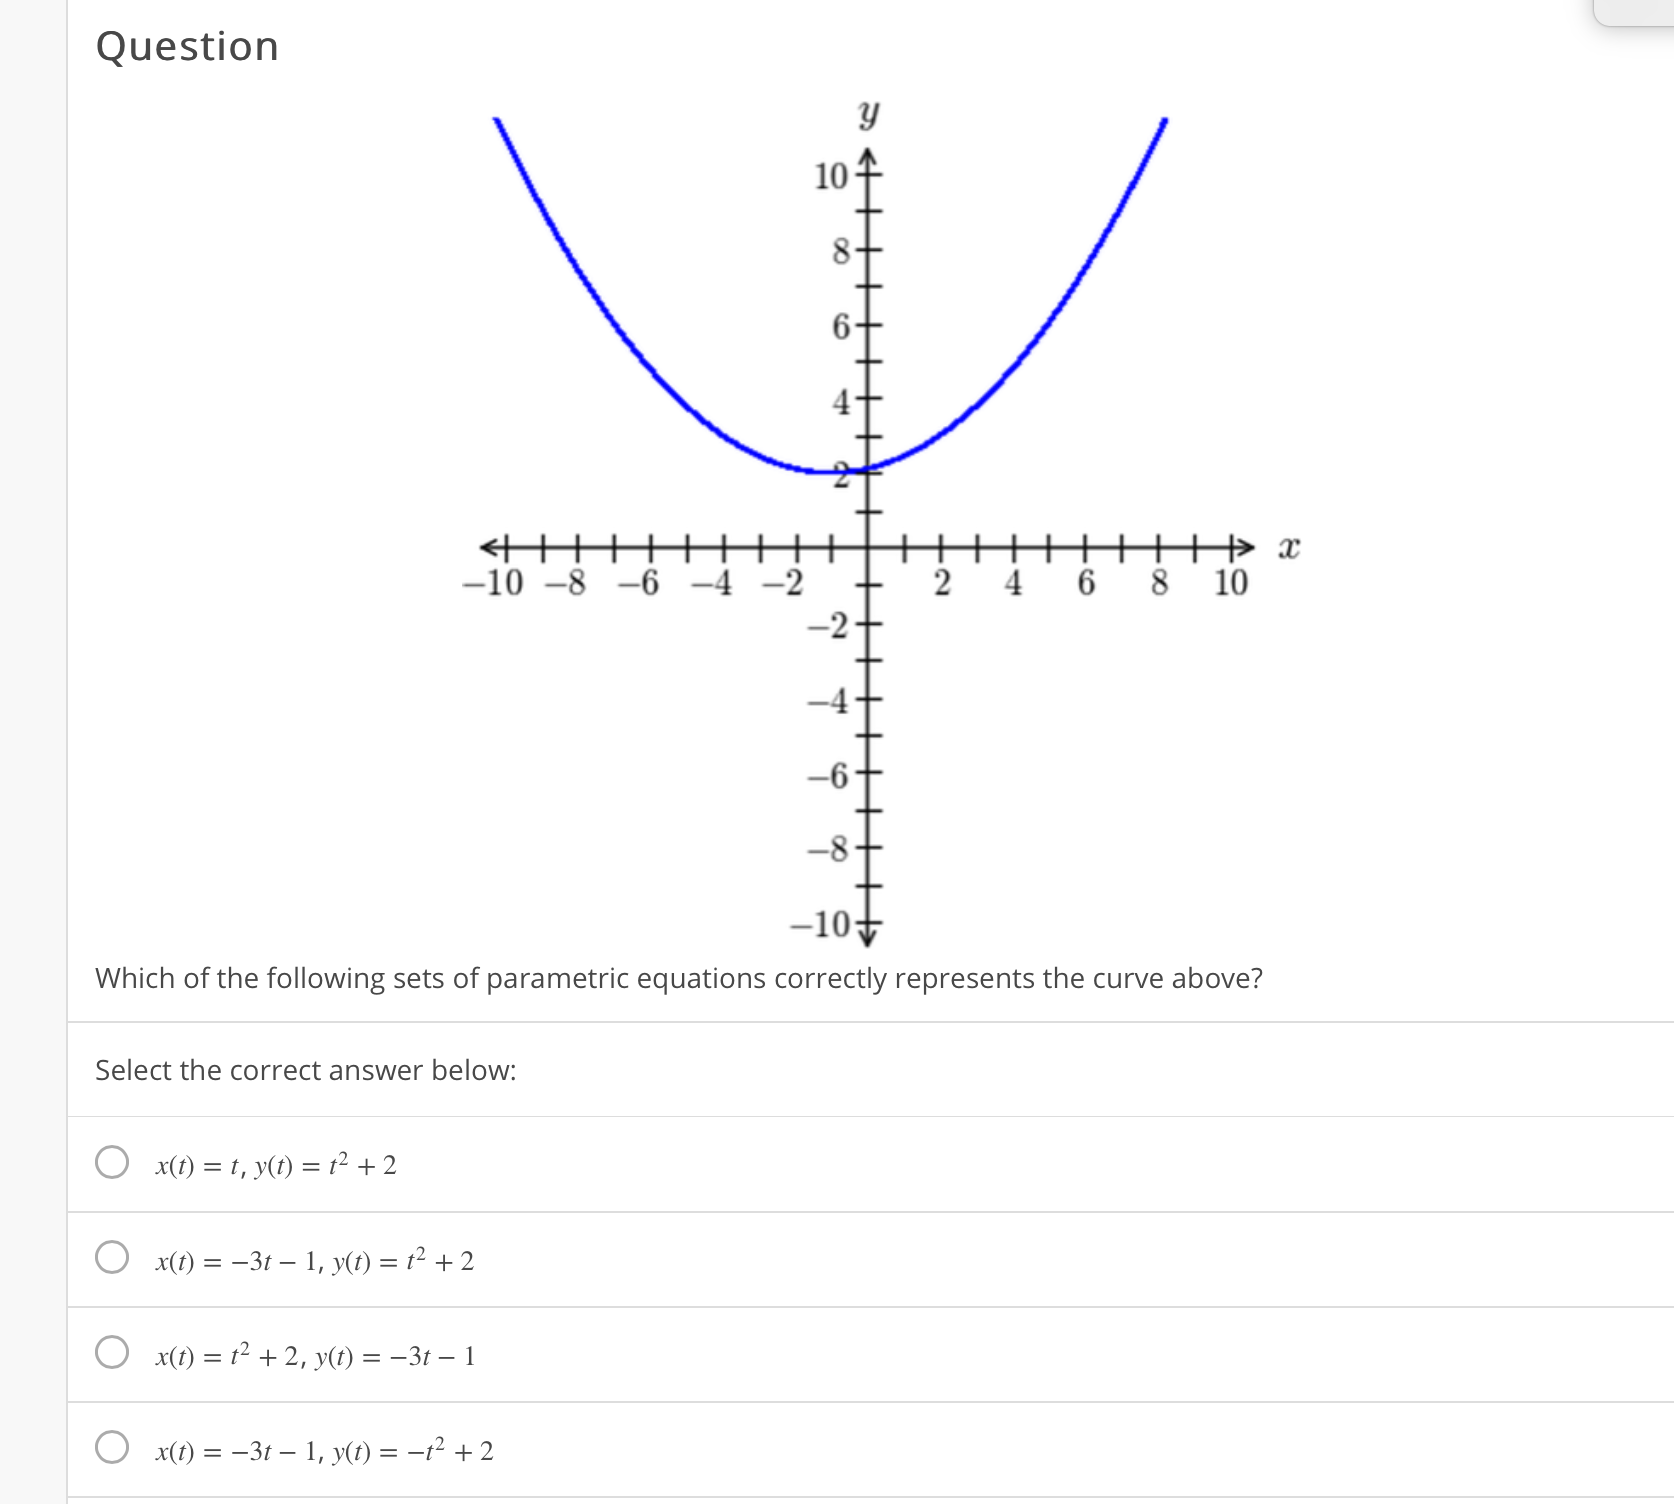 10
+ x
8 10
-10 –8 -6 -4 -2
4
6
-2
-4
-6
-8
-10-
Which of the following sets of parametric equations correctly represents the curve above?
Select the correct answer below:
x(1) = t, y(t) = t² + 2
x(1) = -3t – 1, y(t) = t² + 2
x(t) = t² + 2, y(t) = –3t – 1
x(1) = -3t – 1, y(t) = -t² + 2
2.
6.
4.
